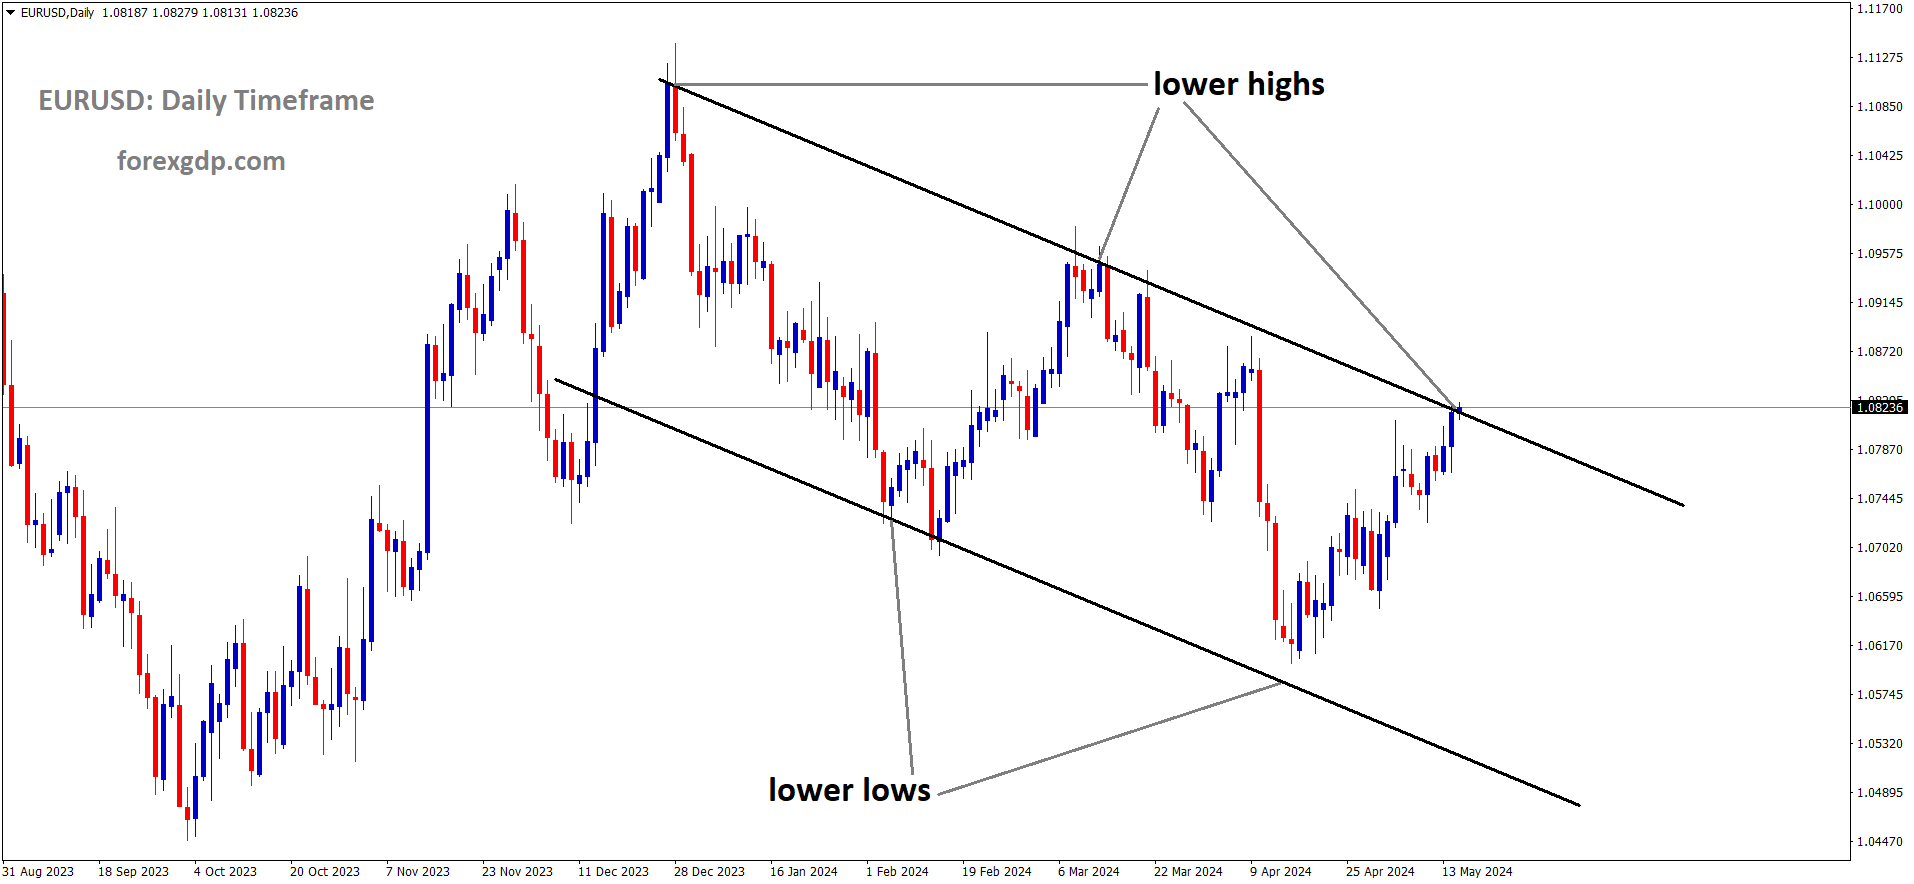 EURUSD is moving in Descending channel and market has reached lower high area of the channel